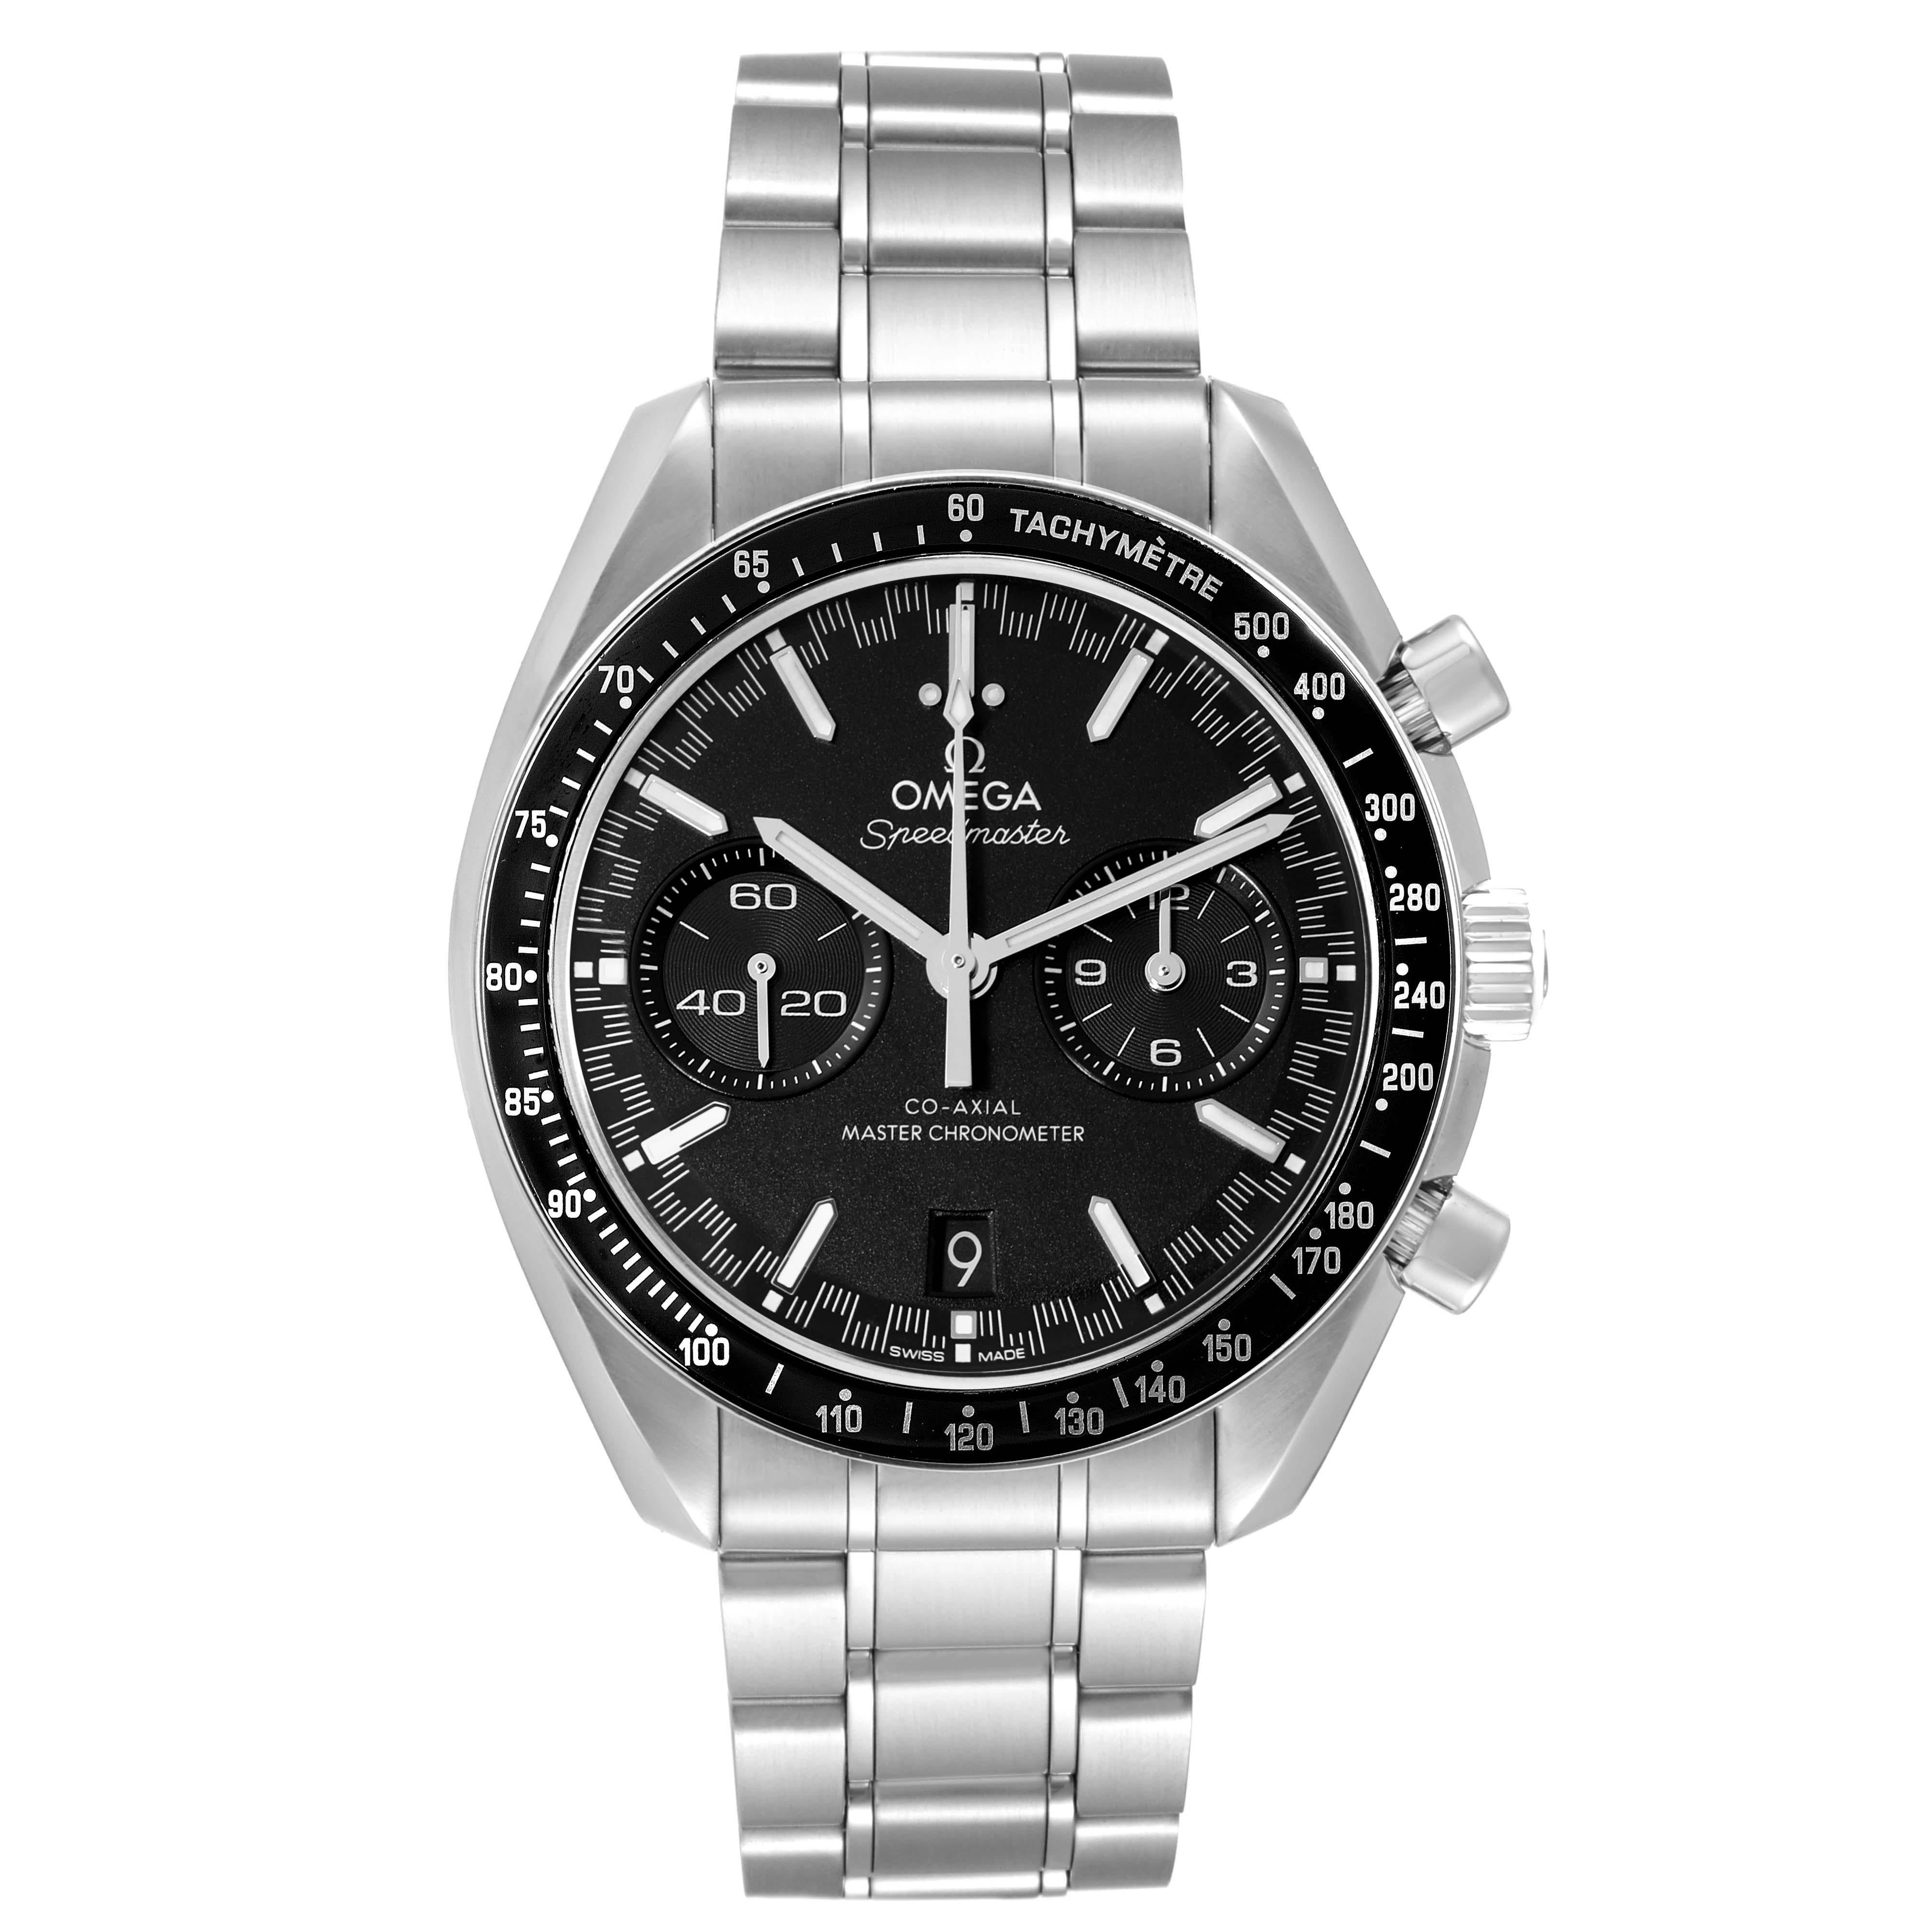 Omega Speedmaster Racing Co-Axial 44 Steel Mens Watch 329.30.44.51.01.001 Box Card. COSC-certified co-axial Omega automatic chronograph movement. Stainless steel round case 44.25 mm in diameter with polished bevelled edges, pushers and crown.